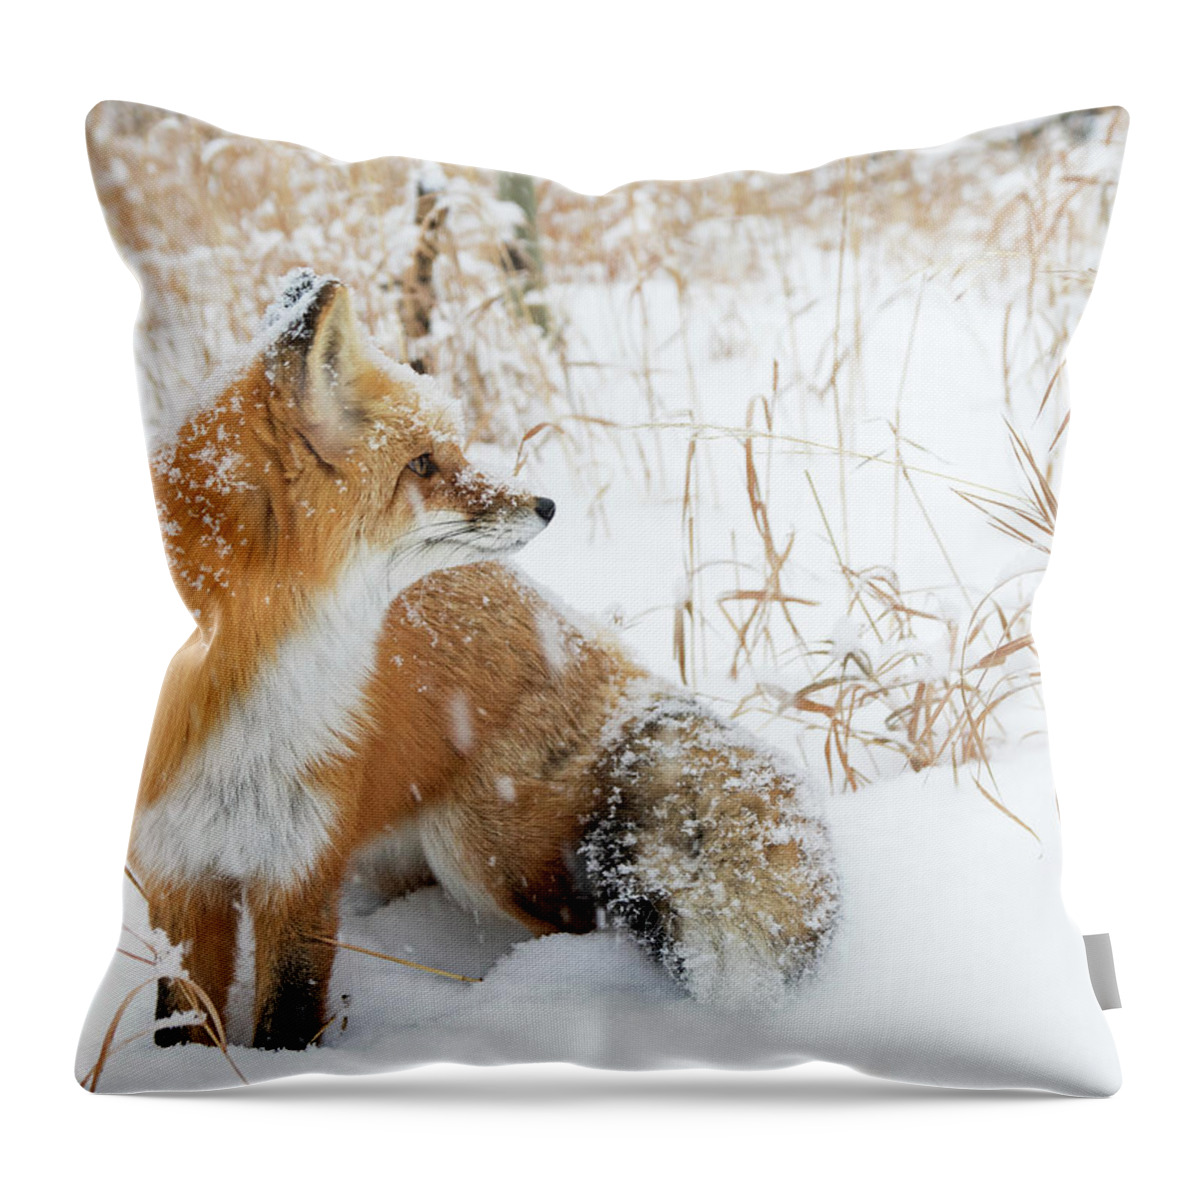 Fox Throw Pillow featuring the photograph In The Distance #2 by Mindy Musick King